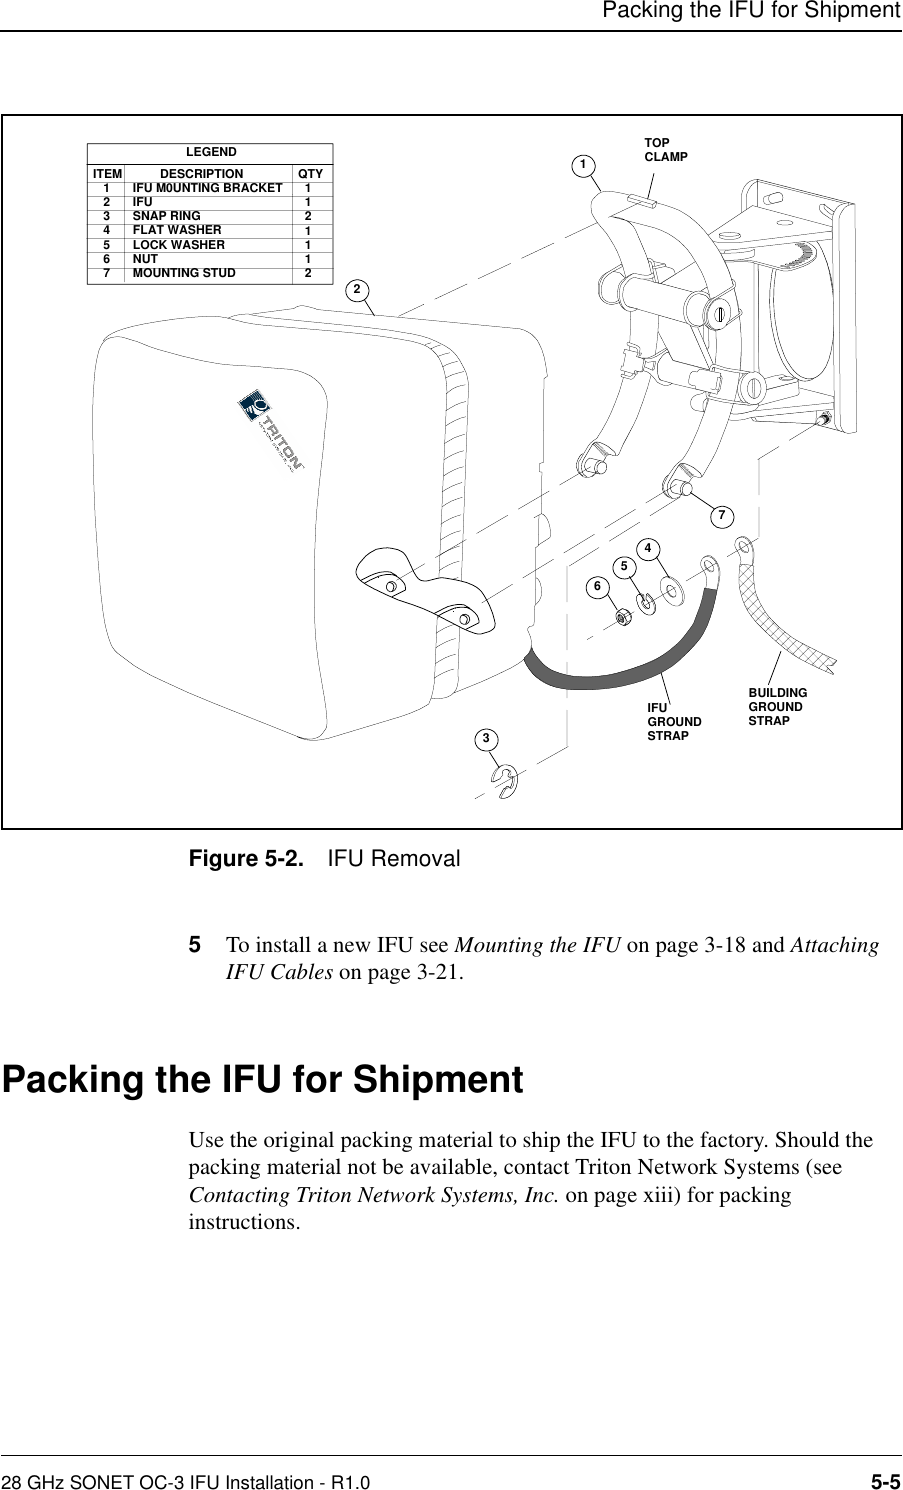 Packing the IFU for Shipment28 GHz SONET OC-3 IFU Installation - R1.0 5-5Figure 5-2. IFU Removal5To install a new IFU see Mounting the IFU on page 3-18 and Attaching IFU Cables on page 3-21.Packing the IFU for ShipmentUse the original packing material to ship the IFU to the factory. Should the packing material not be available, contact Triton Network Systems (see Contacting Triton Network Systems, Inc. on page xiii) for packing instructions.345621LEGENDITEM   1   2   3   4   5   6   7           DESCRIPTIONIFU M0UNTING BRACKETIFUSNAP RINGFLAT WASHERLOCK WASHERNUTMOUNTING STUDQTY  1  1  2  1  1  1  2  IFU GROUNDSTRAP7BUILDINGGROUNDSTRAPTOPCLAMP